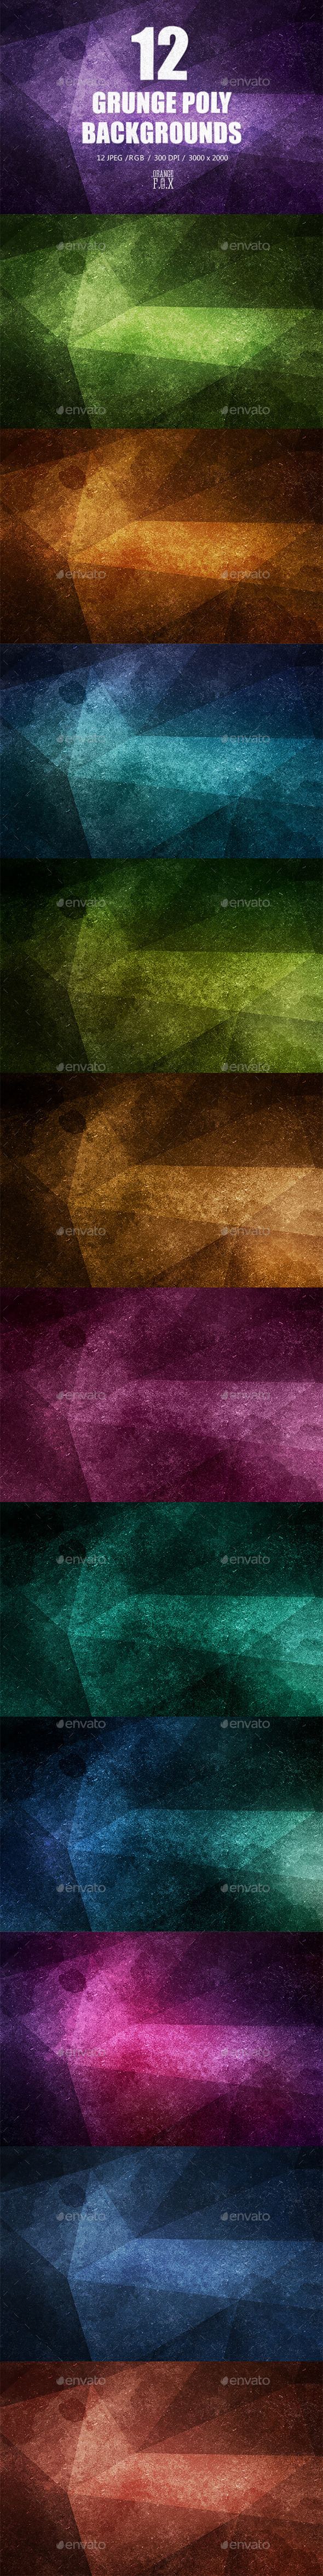 12 Grunge poly Backgrounds_preview.jpg